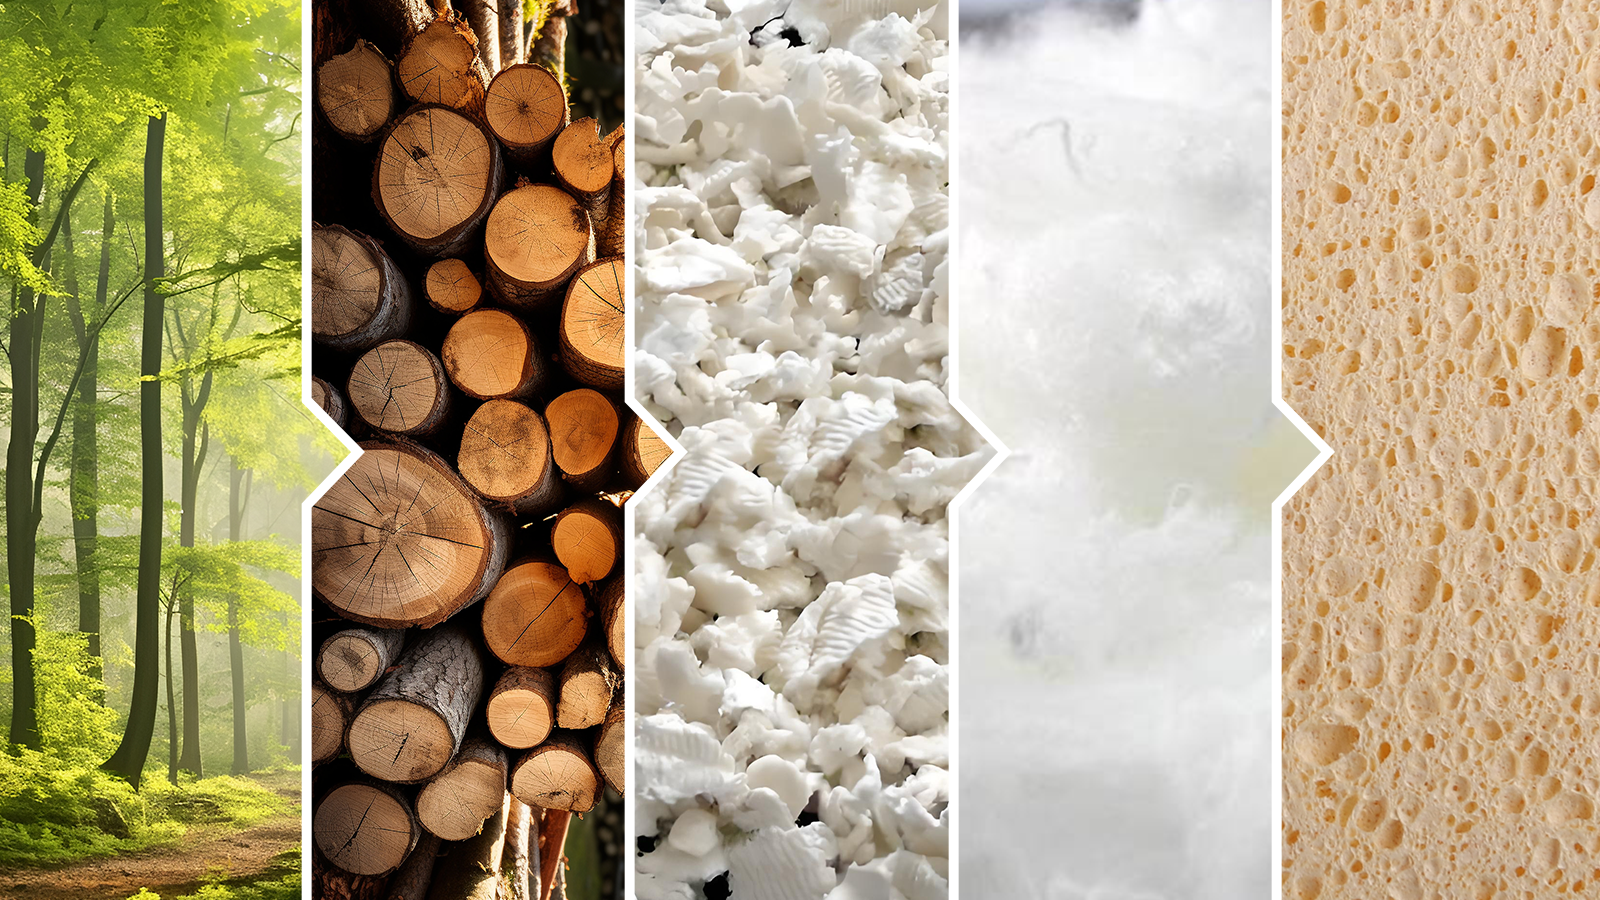 Cellulose sponges are made from wood pulp, a renewable resource.